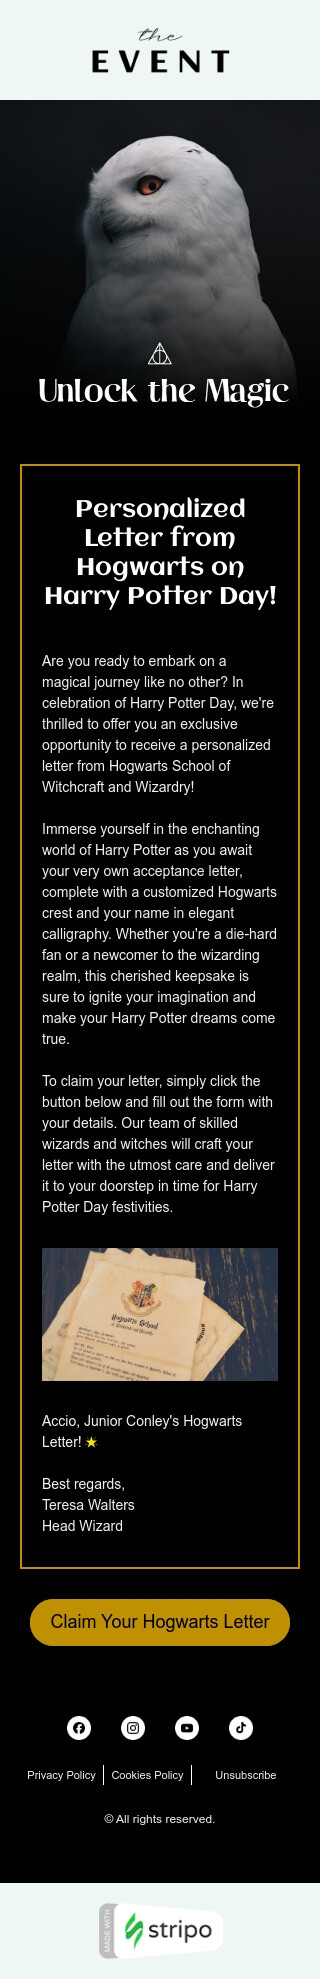 Harry Potter Day email template "Unlock the magic" for hobbies industry mobile view